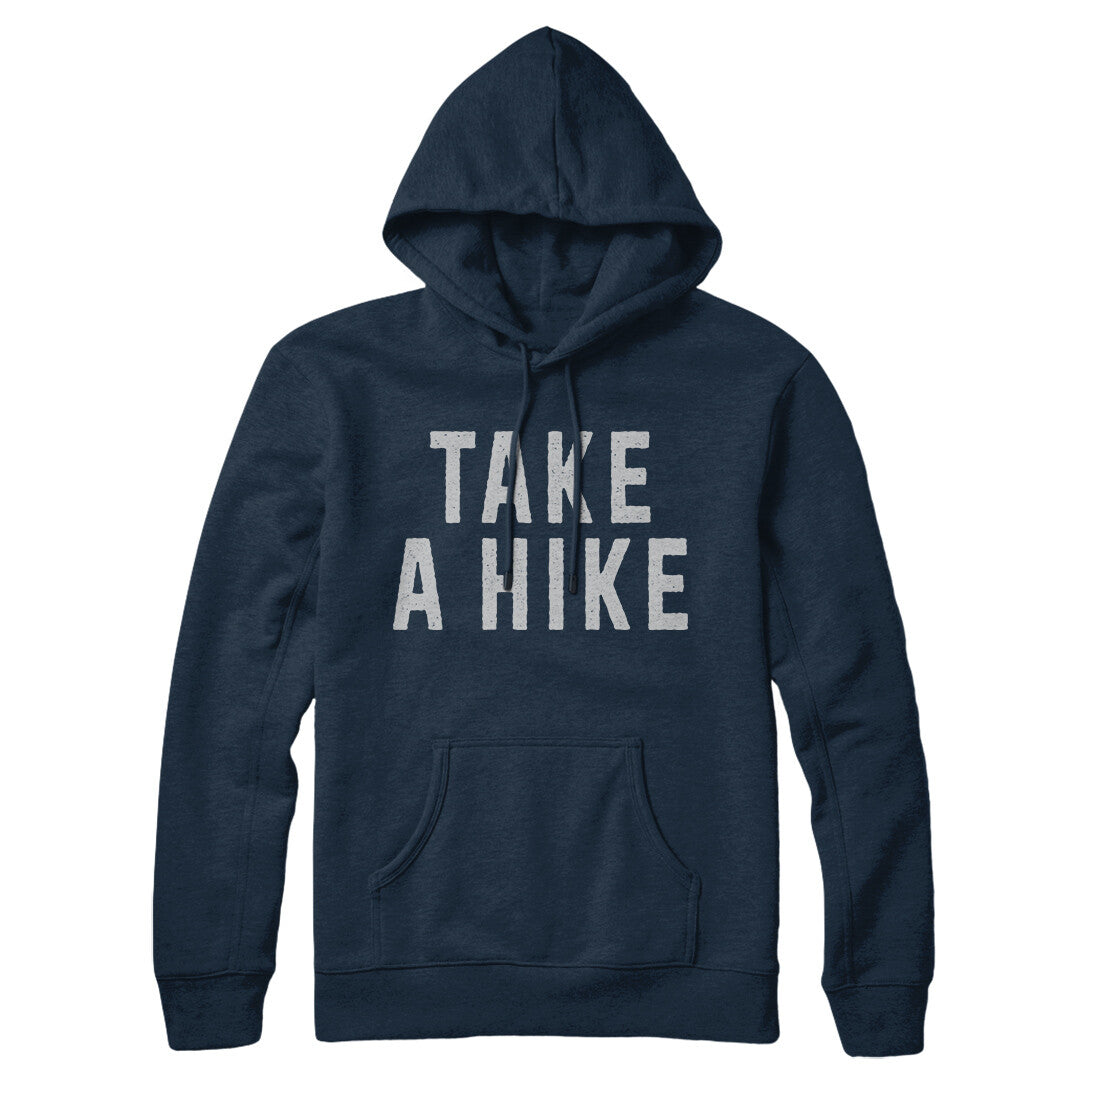 Take a Hike in Navy Blue Color